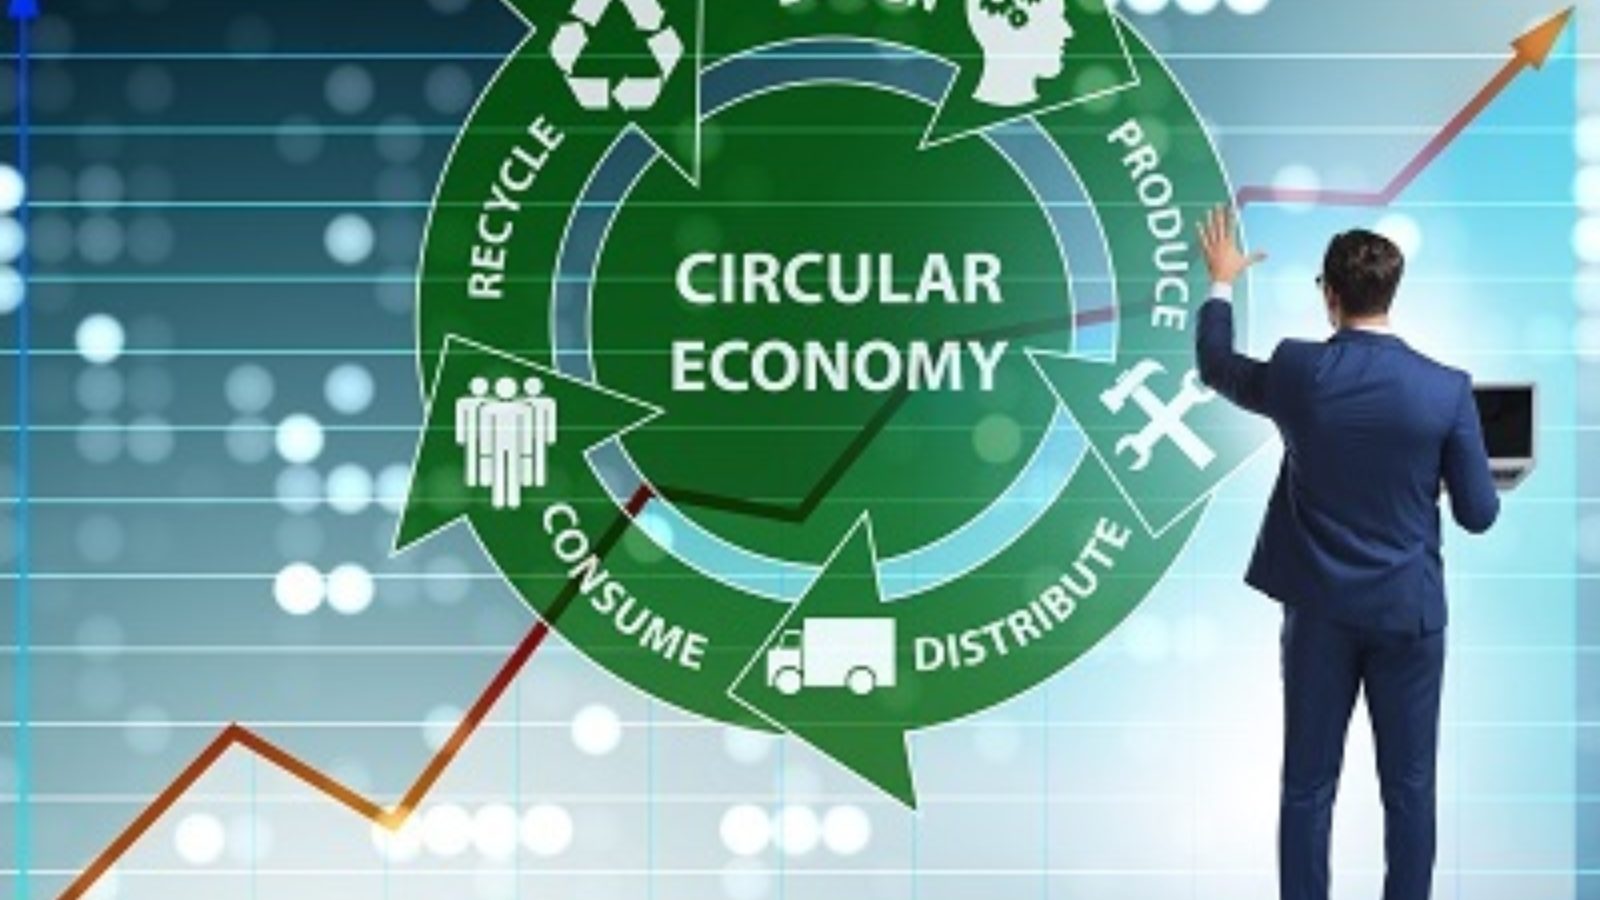 Blog: What might Covid–19 mean for the future of the circular economy?